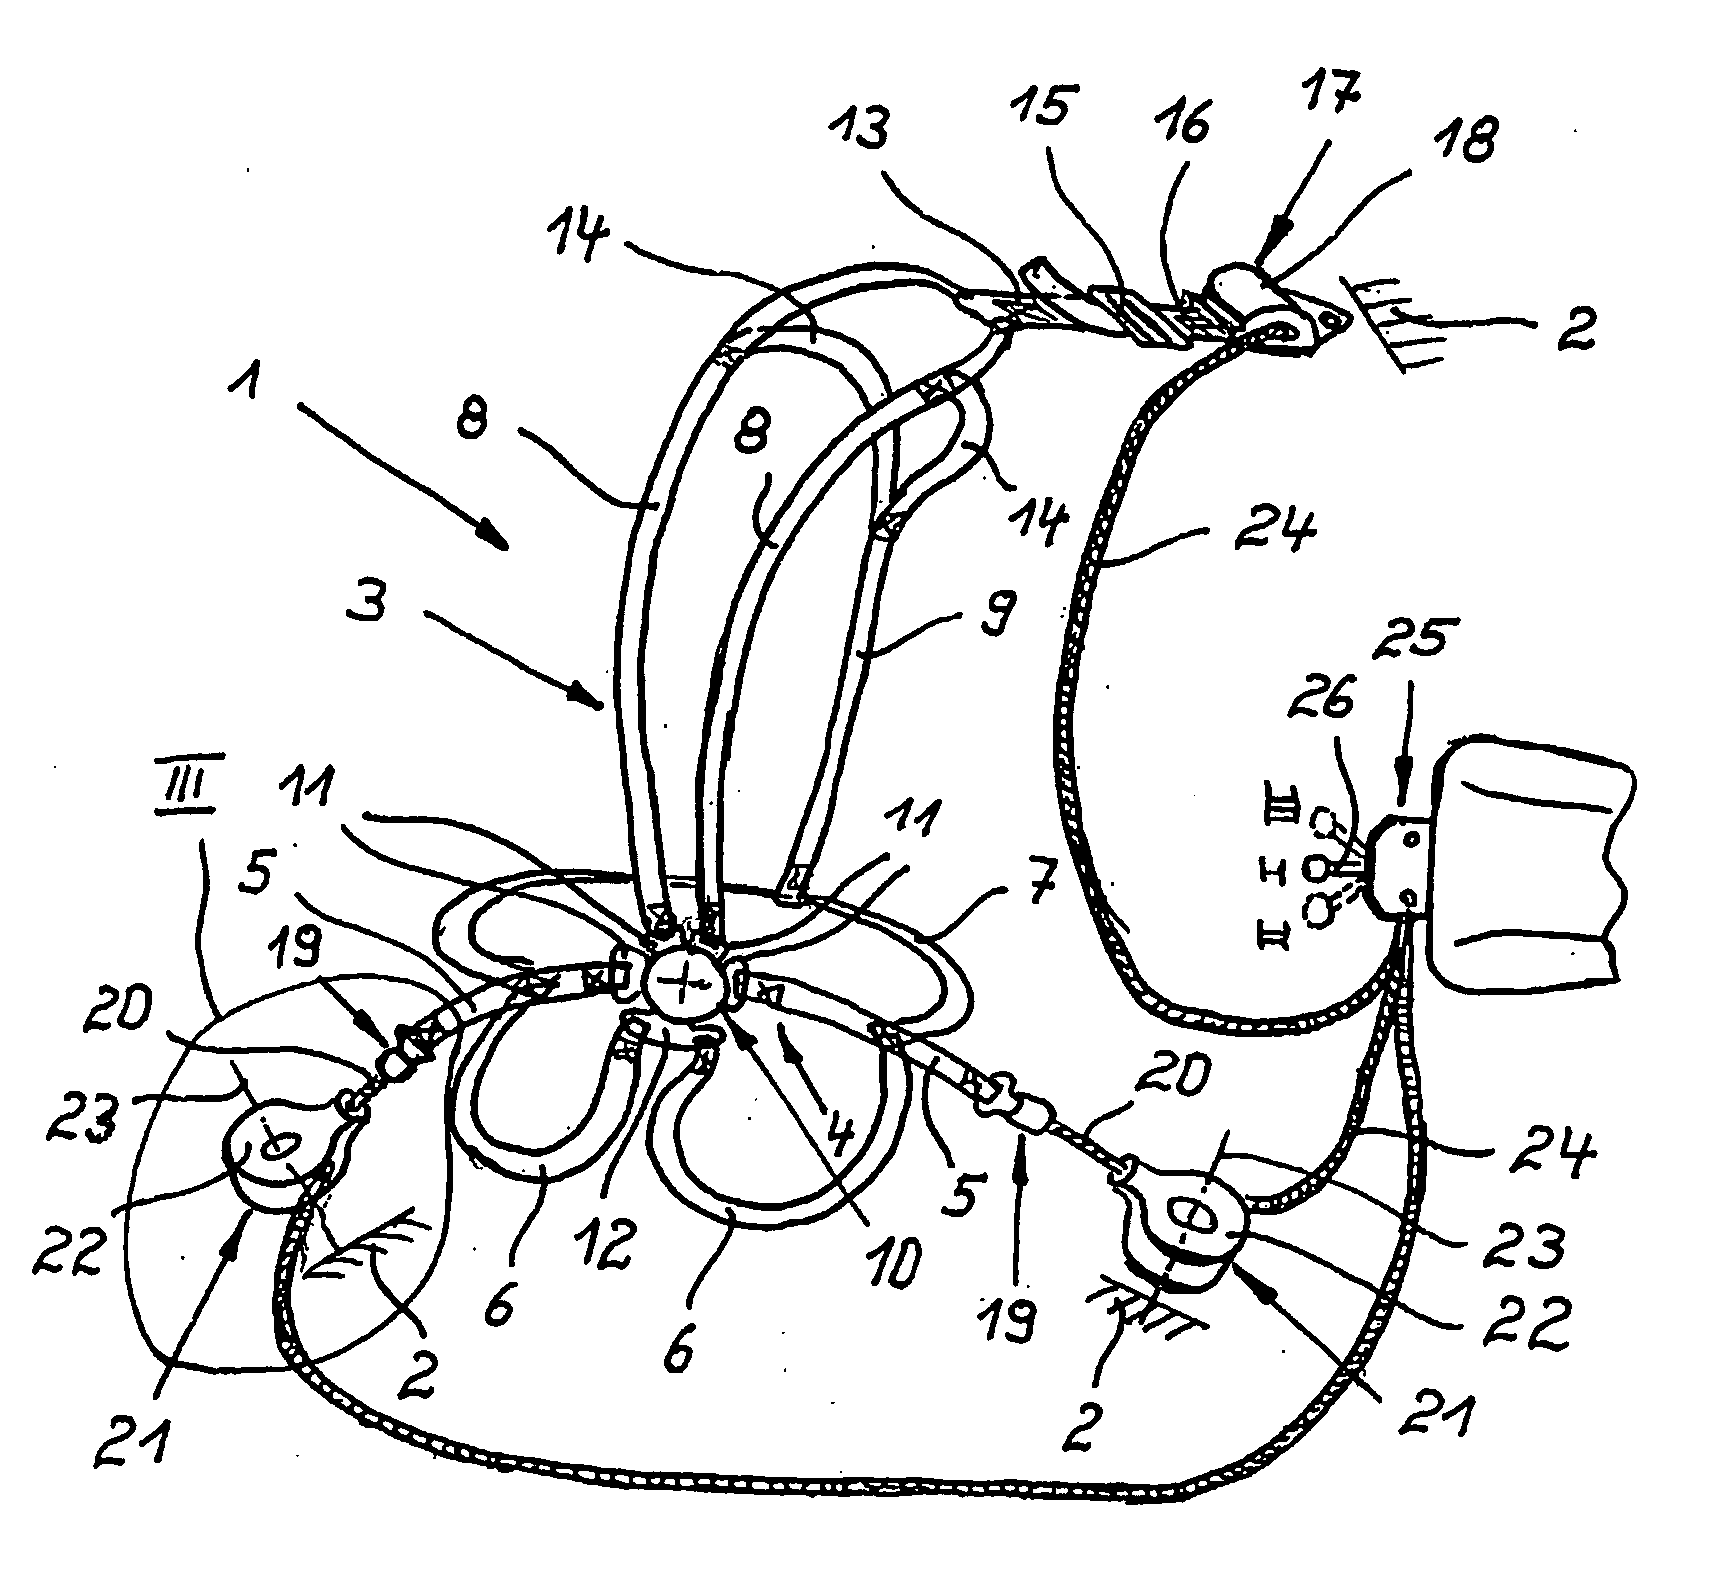 Position securing system for restraining an occupant in land and aeronautical vehicles